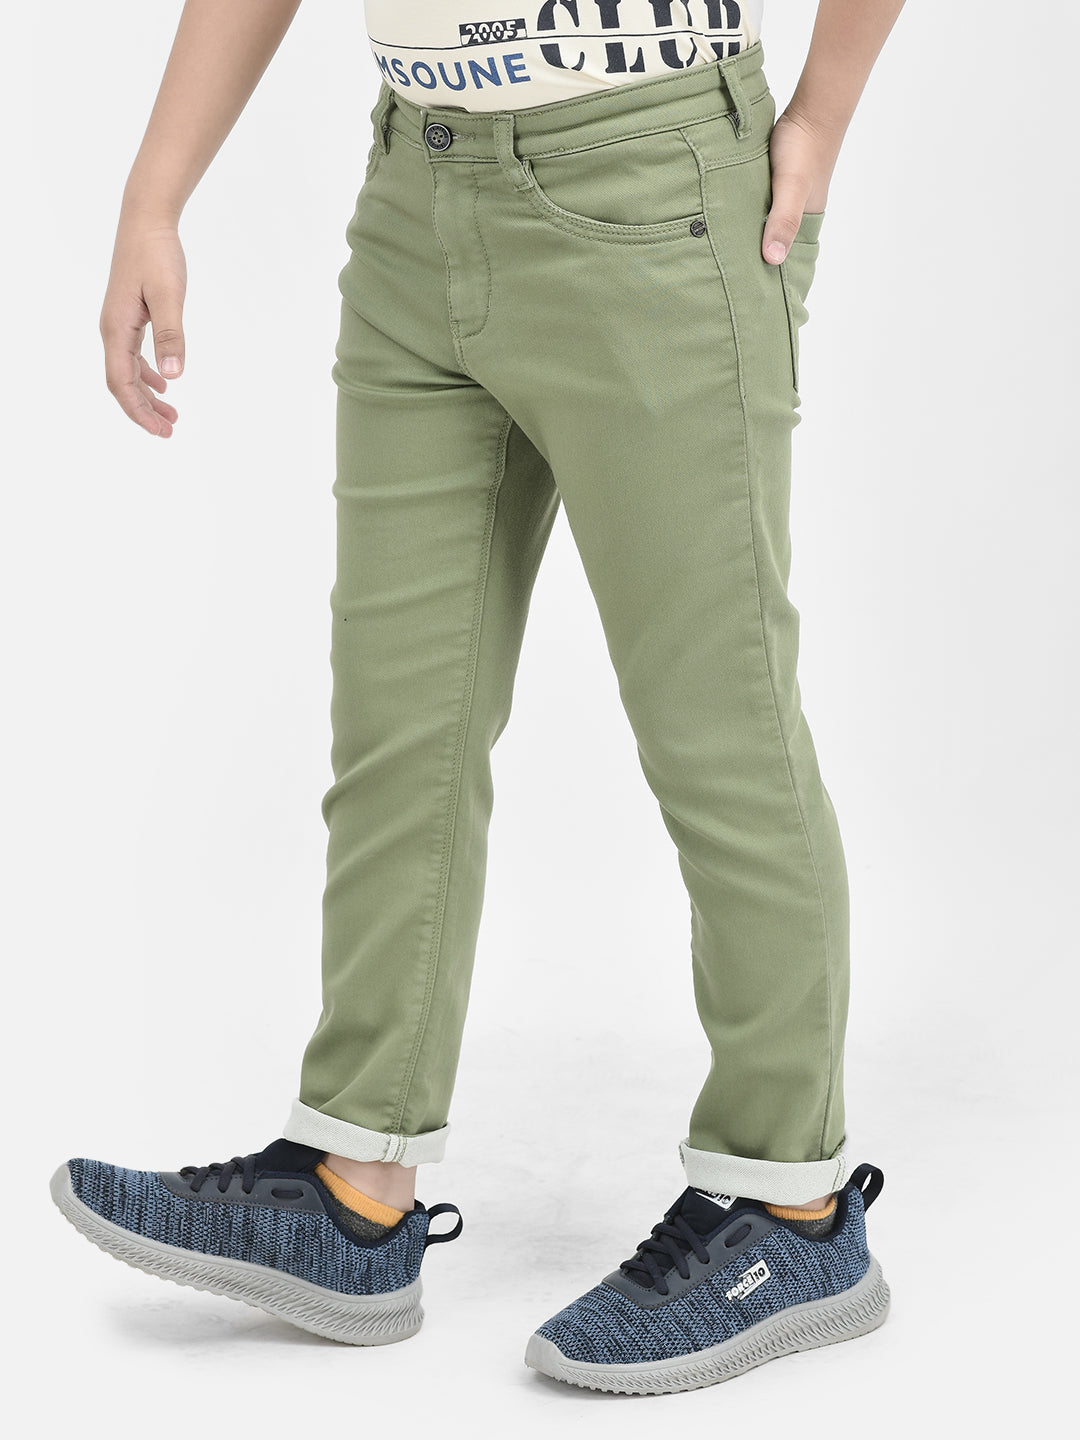  Olive Trousers in Denim Look